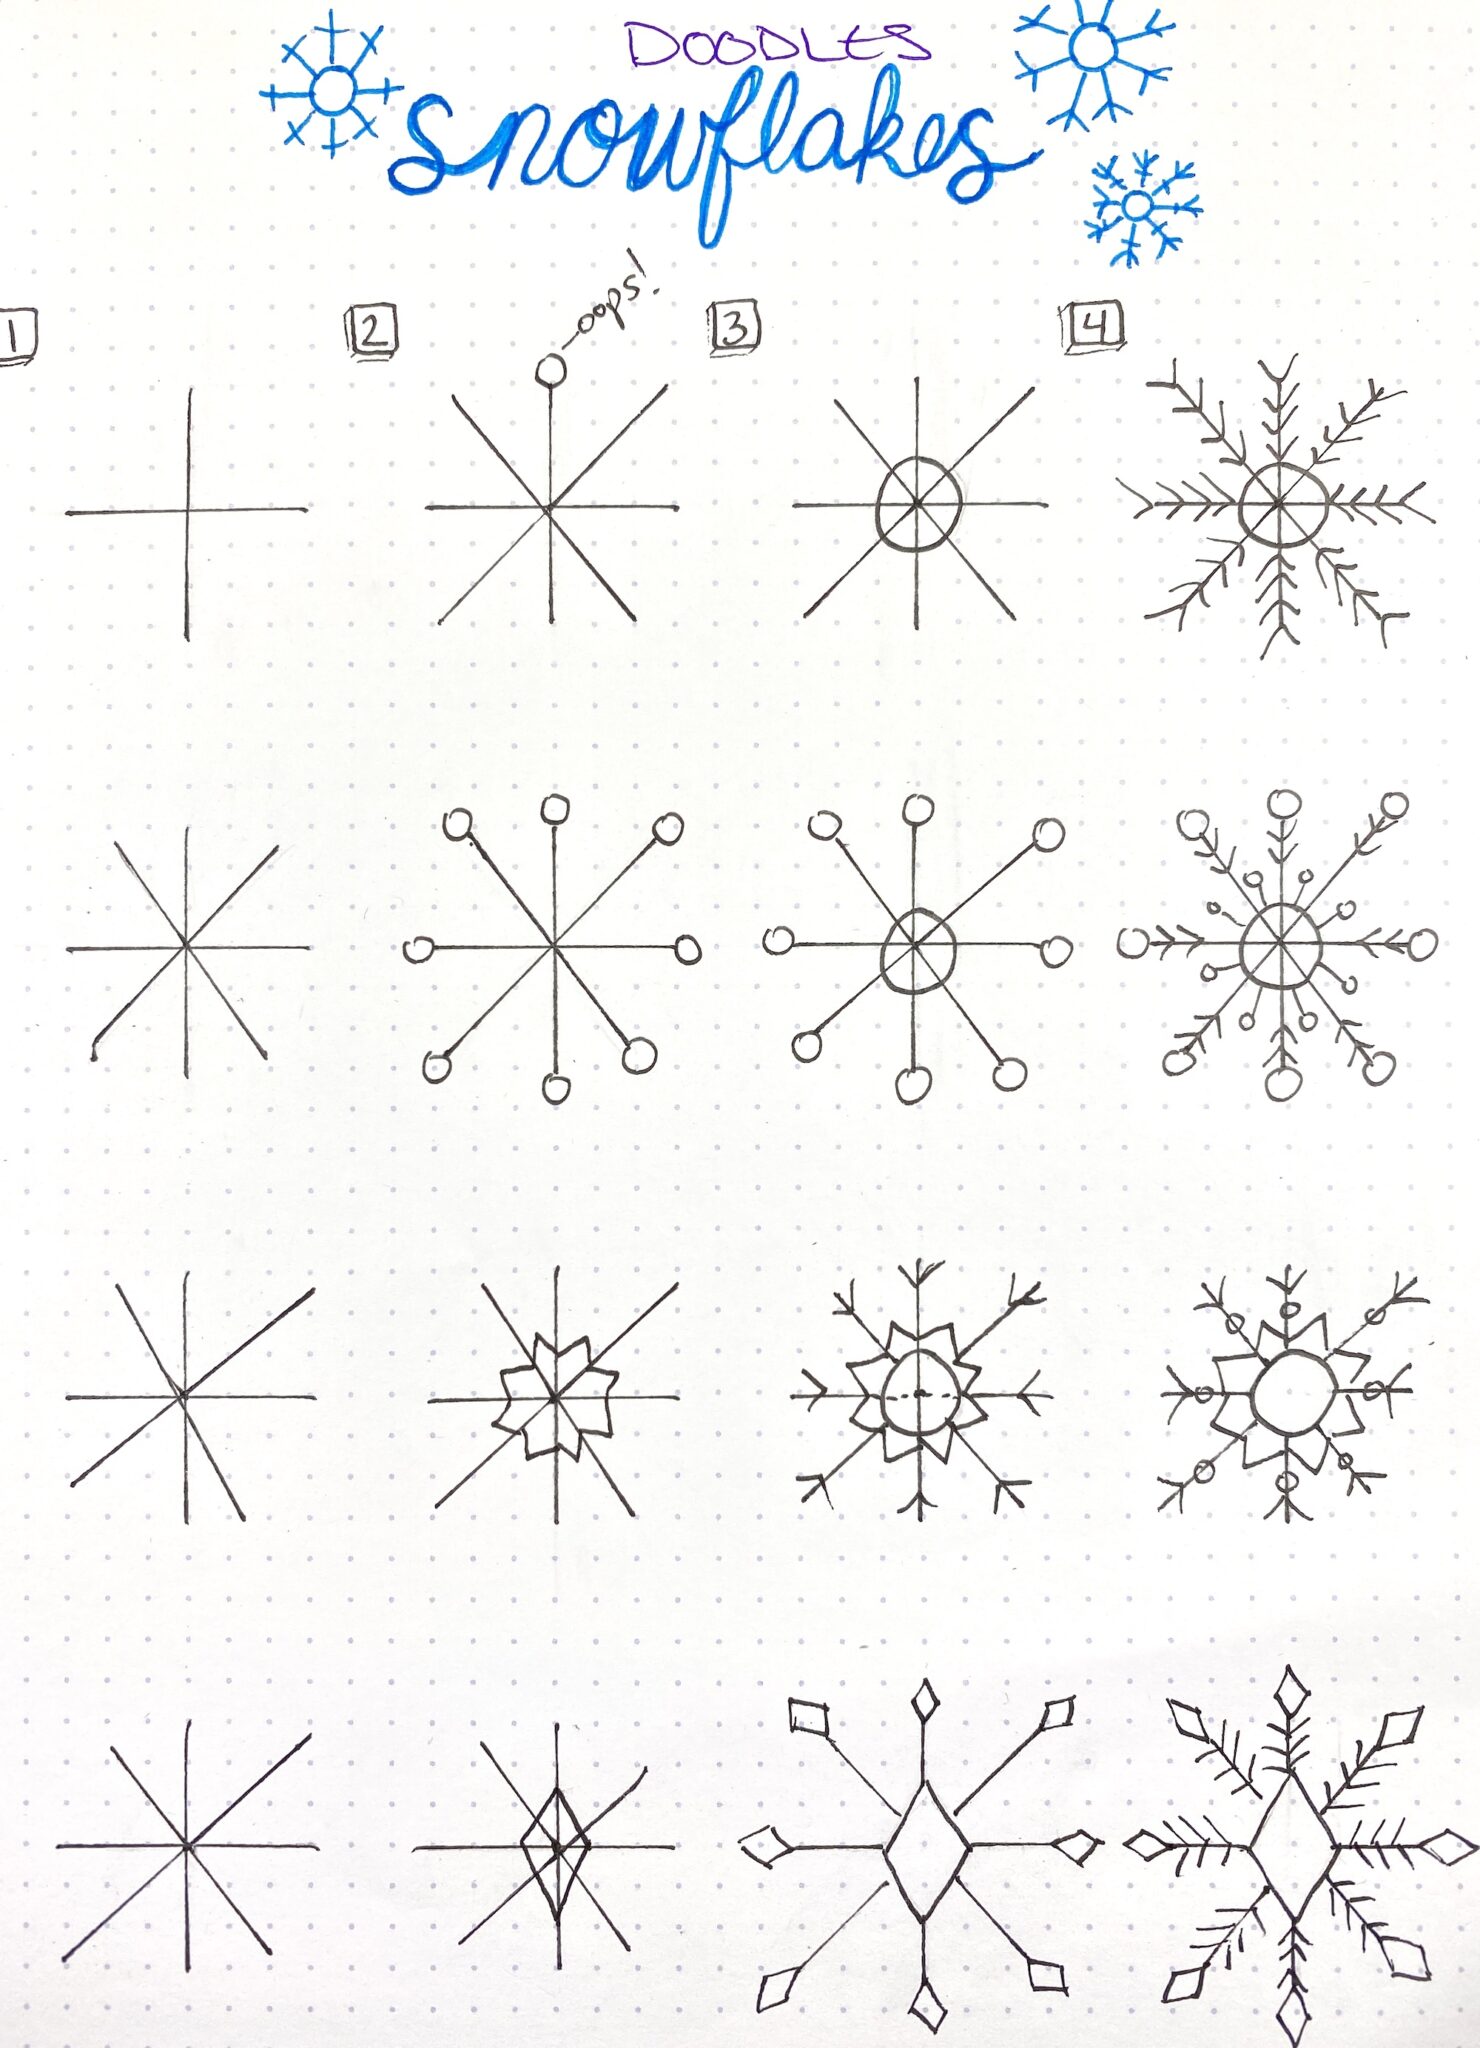 How to Draw a Snowflake in Your Planner or Bujo in Just 4 Easy Steps